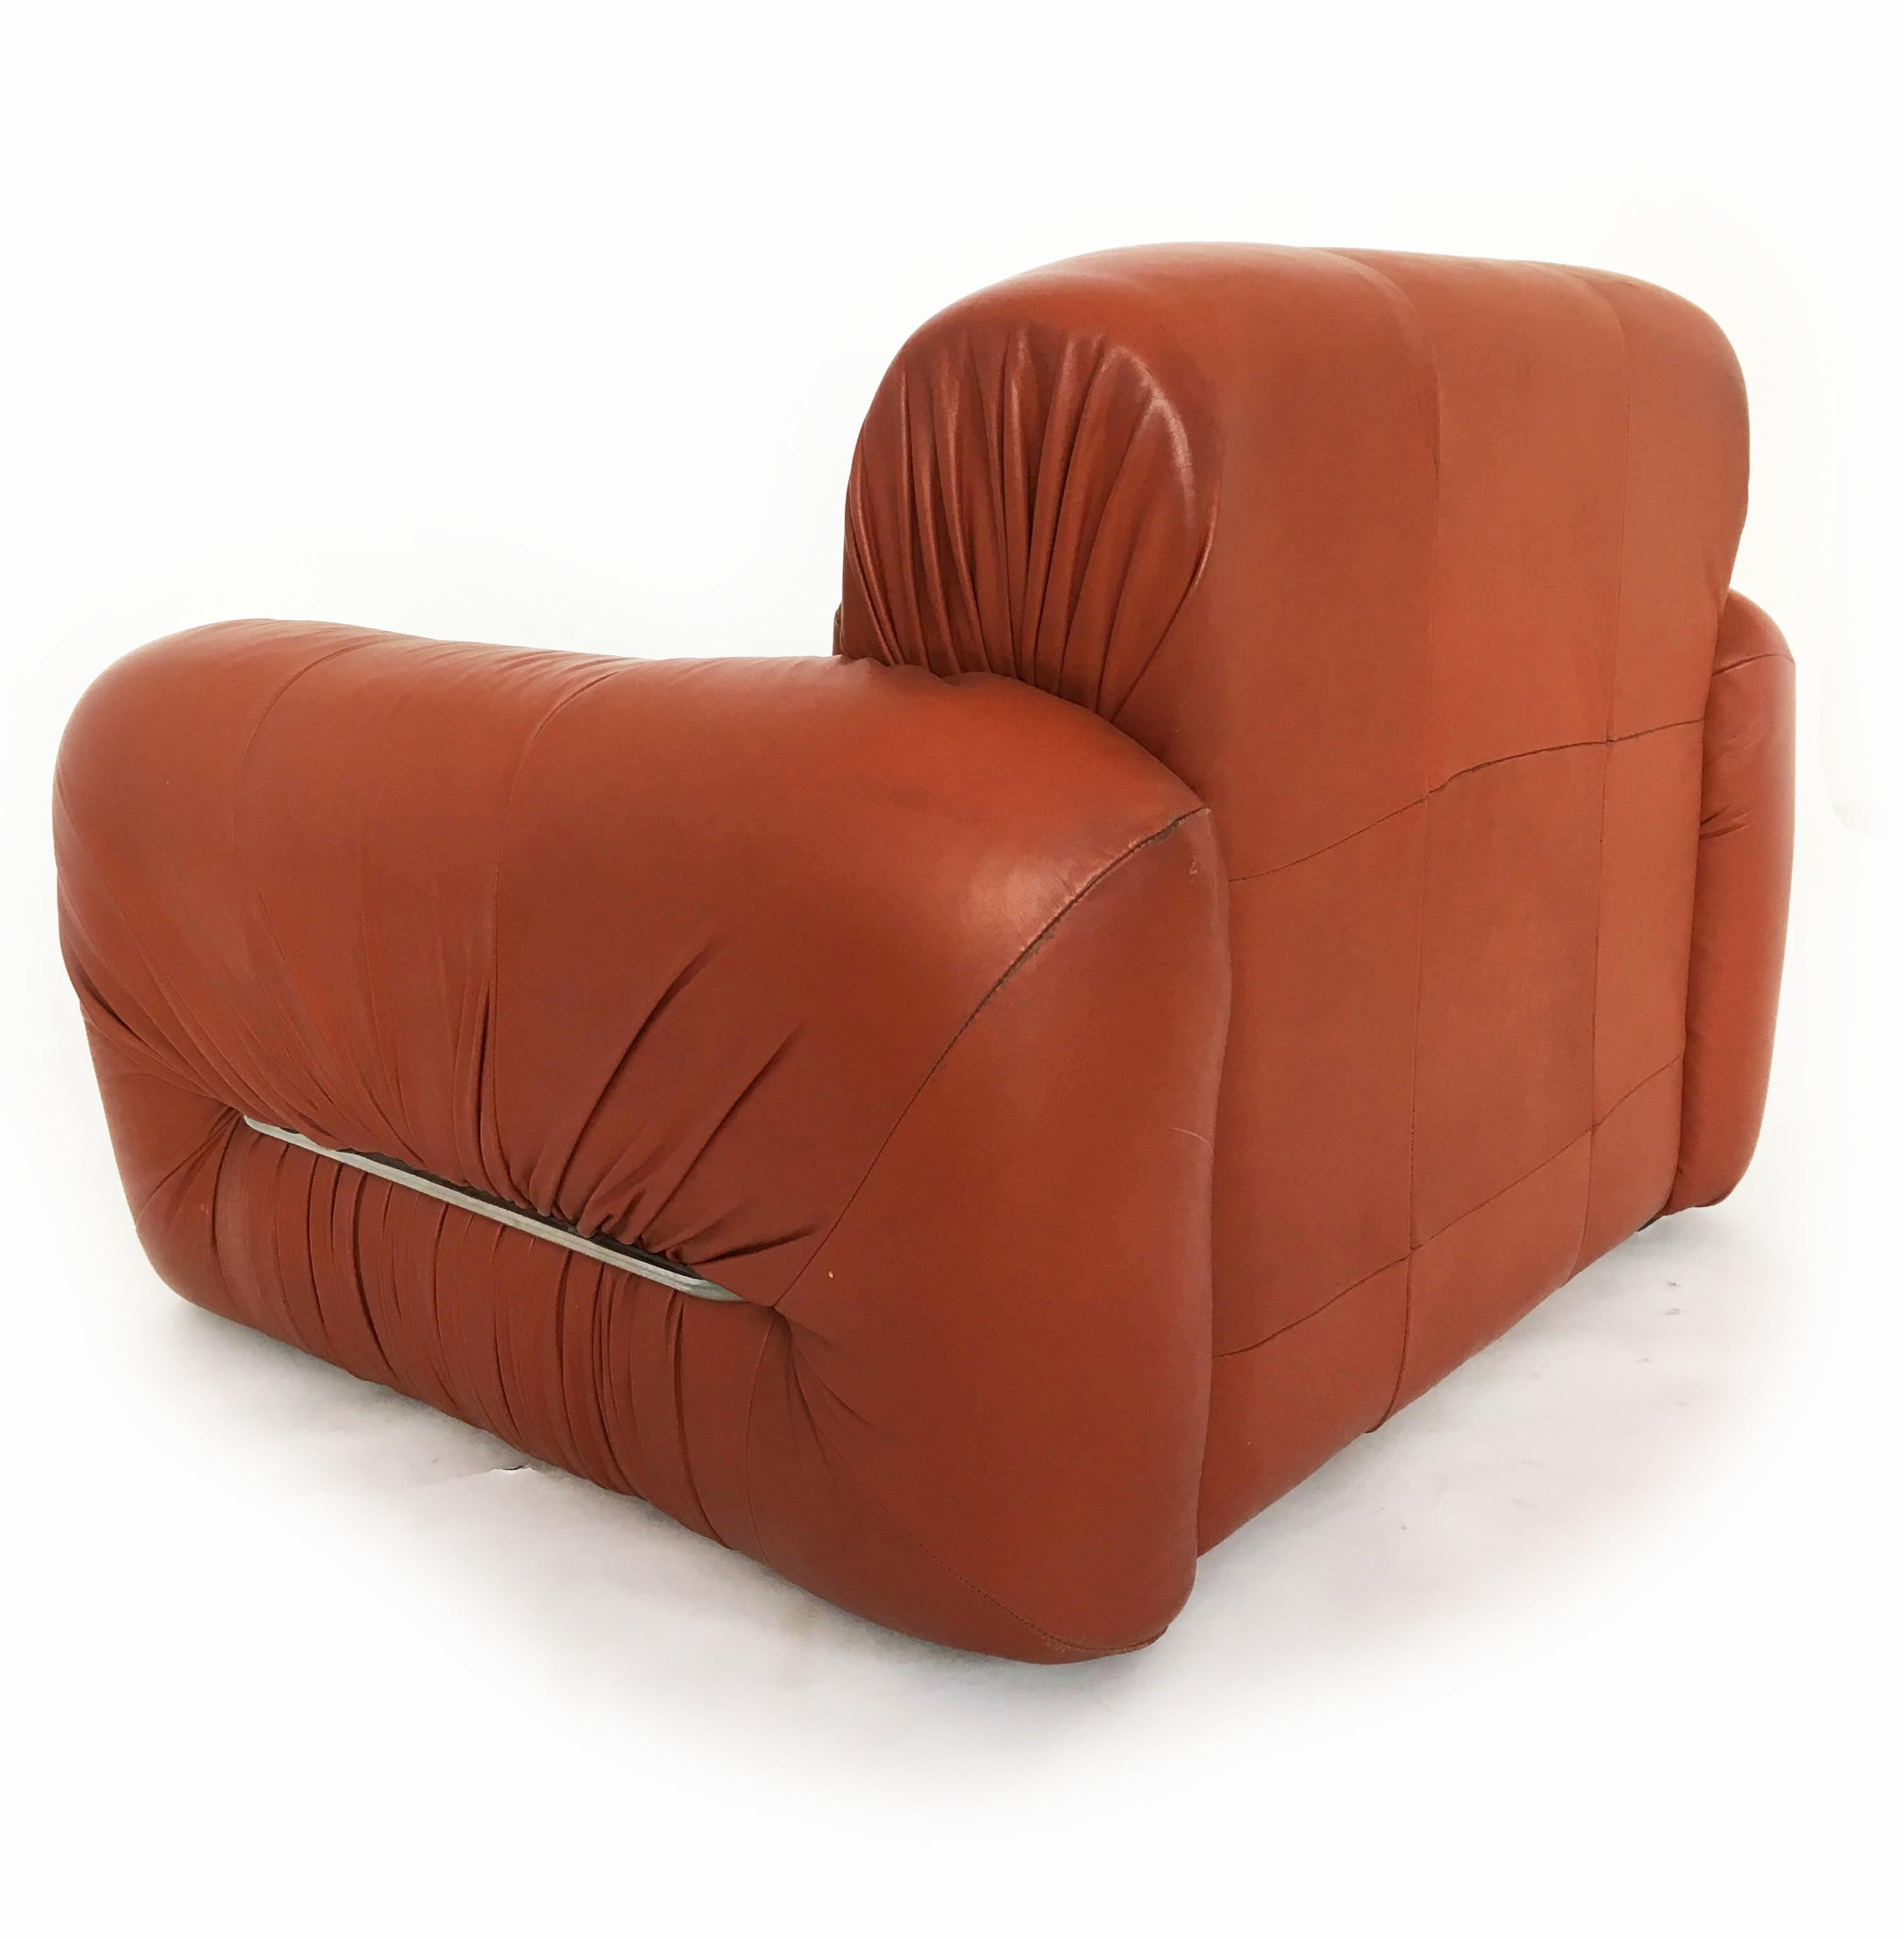 Jean Gillon Cognac Patchwork Leather Club Chairs by Probel, Brazil 1970s For Sale 9